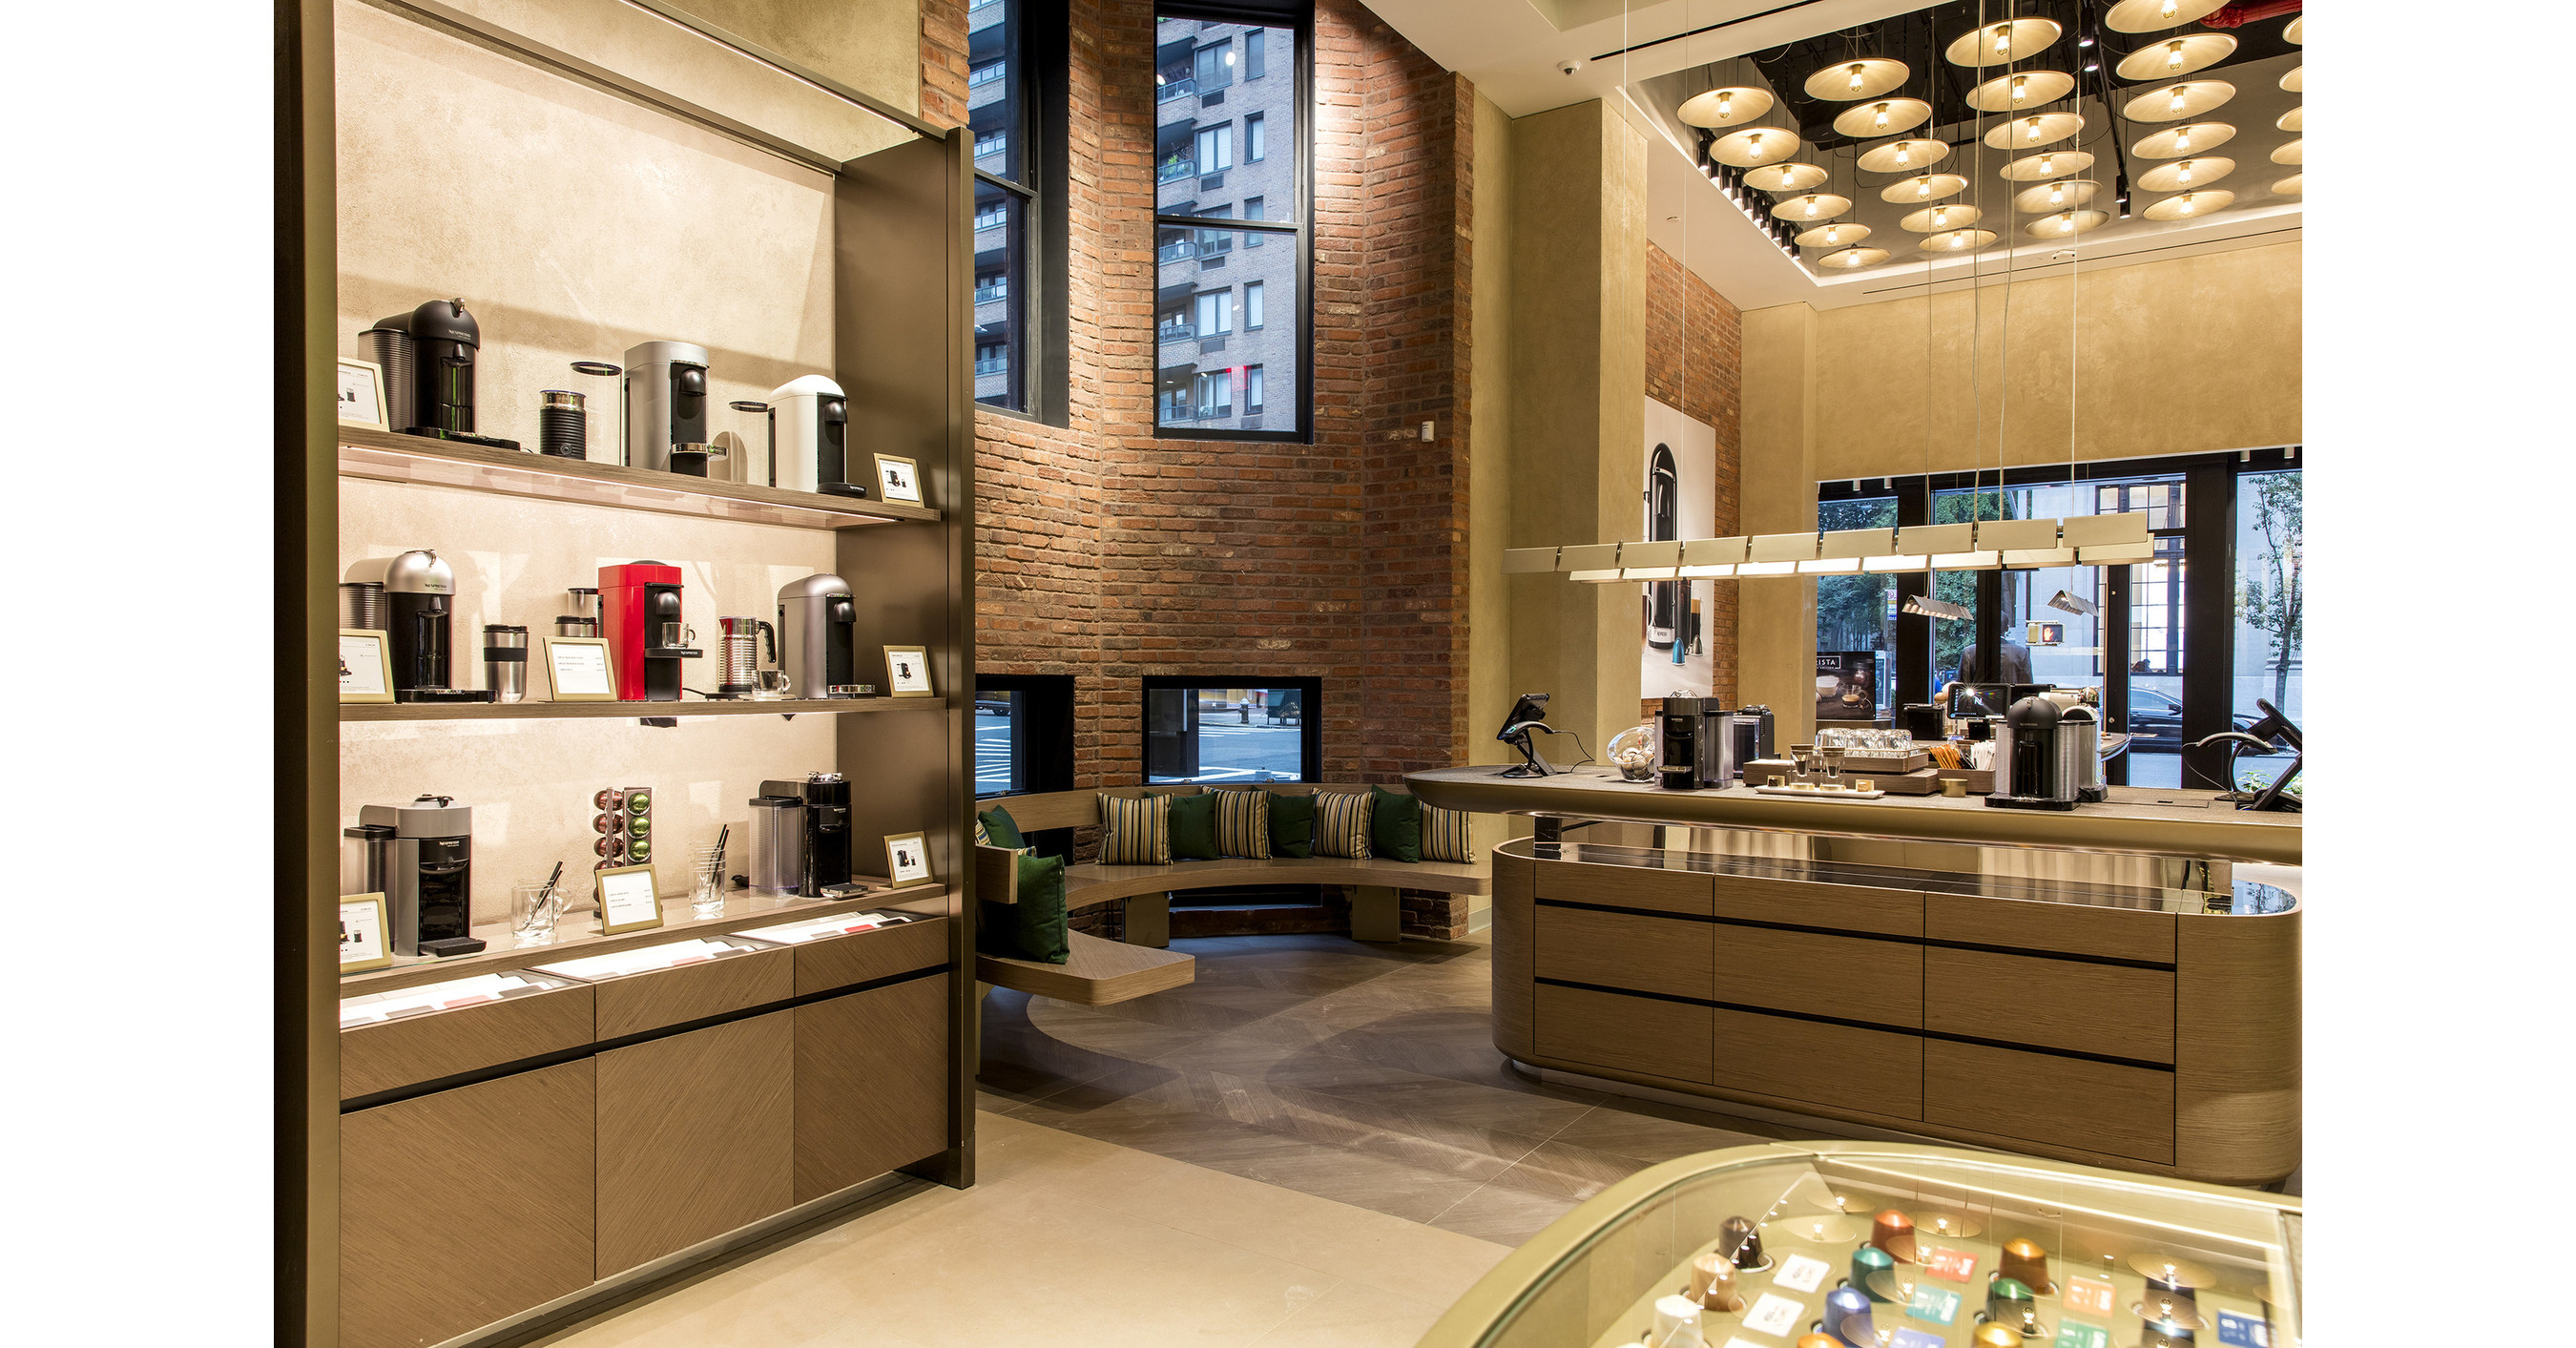 Nespresso Premieres Boutique Concept In The U.S. To Immerse Visitors In The Ultimate Coffee Experience And Commitment To Sustainability